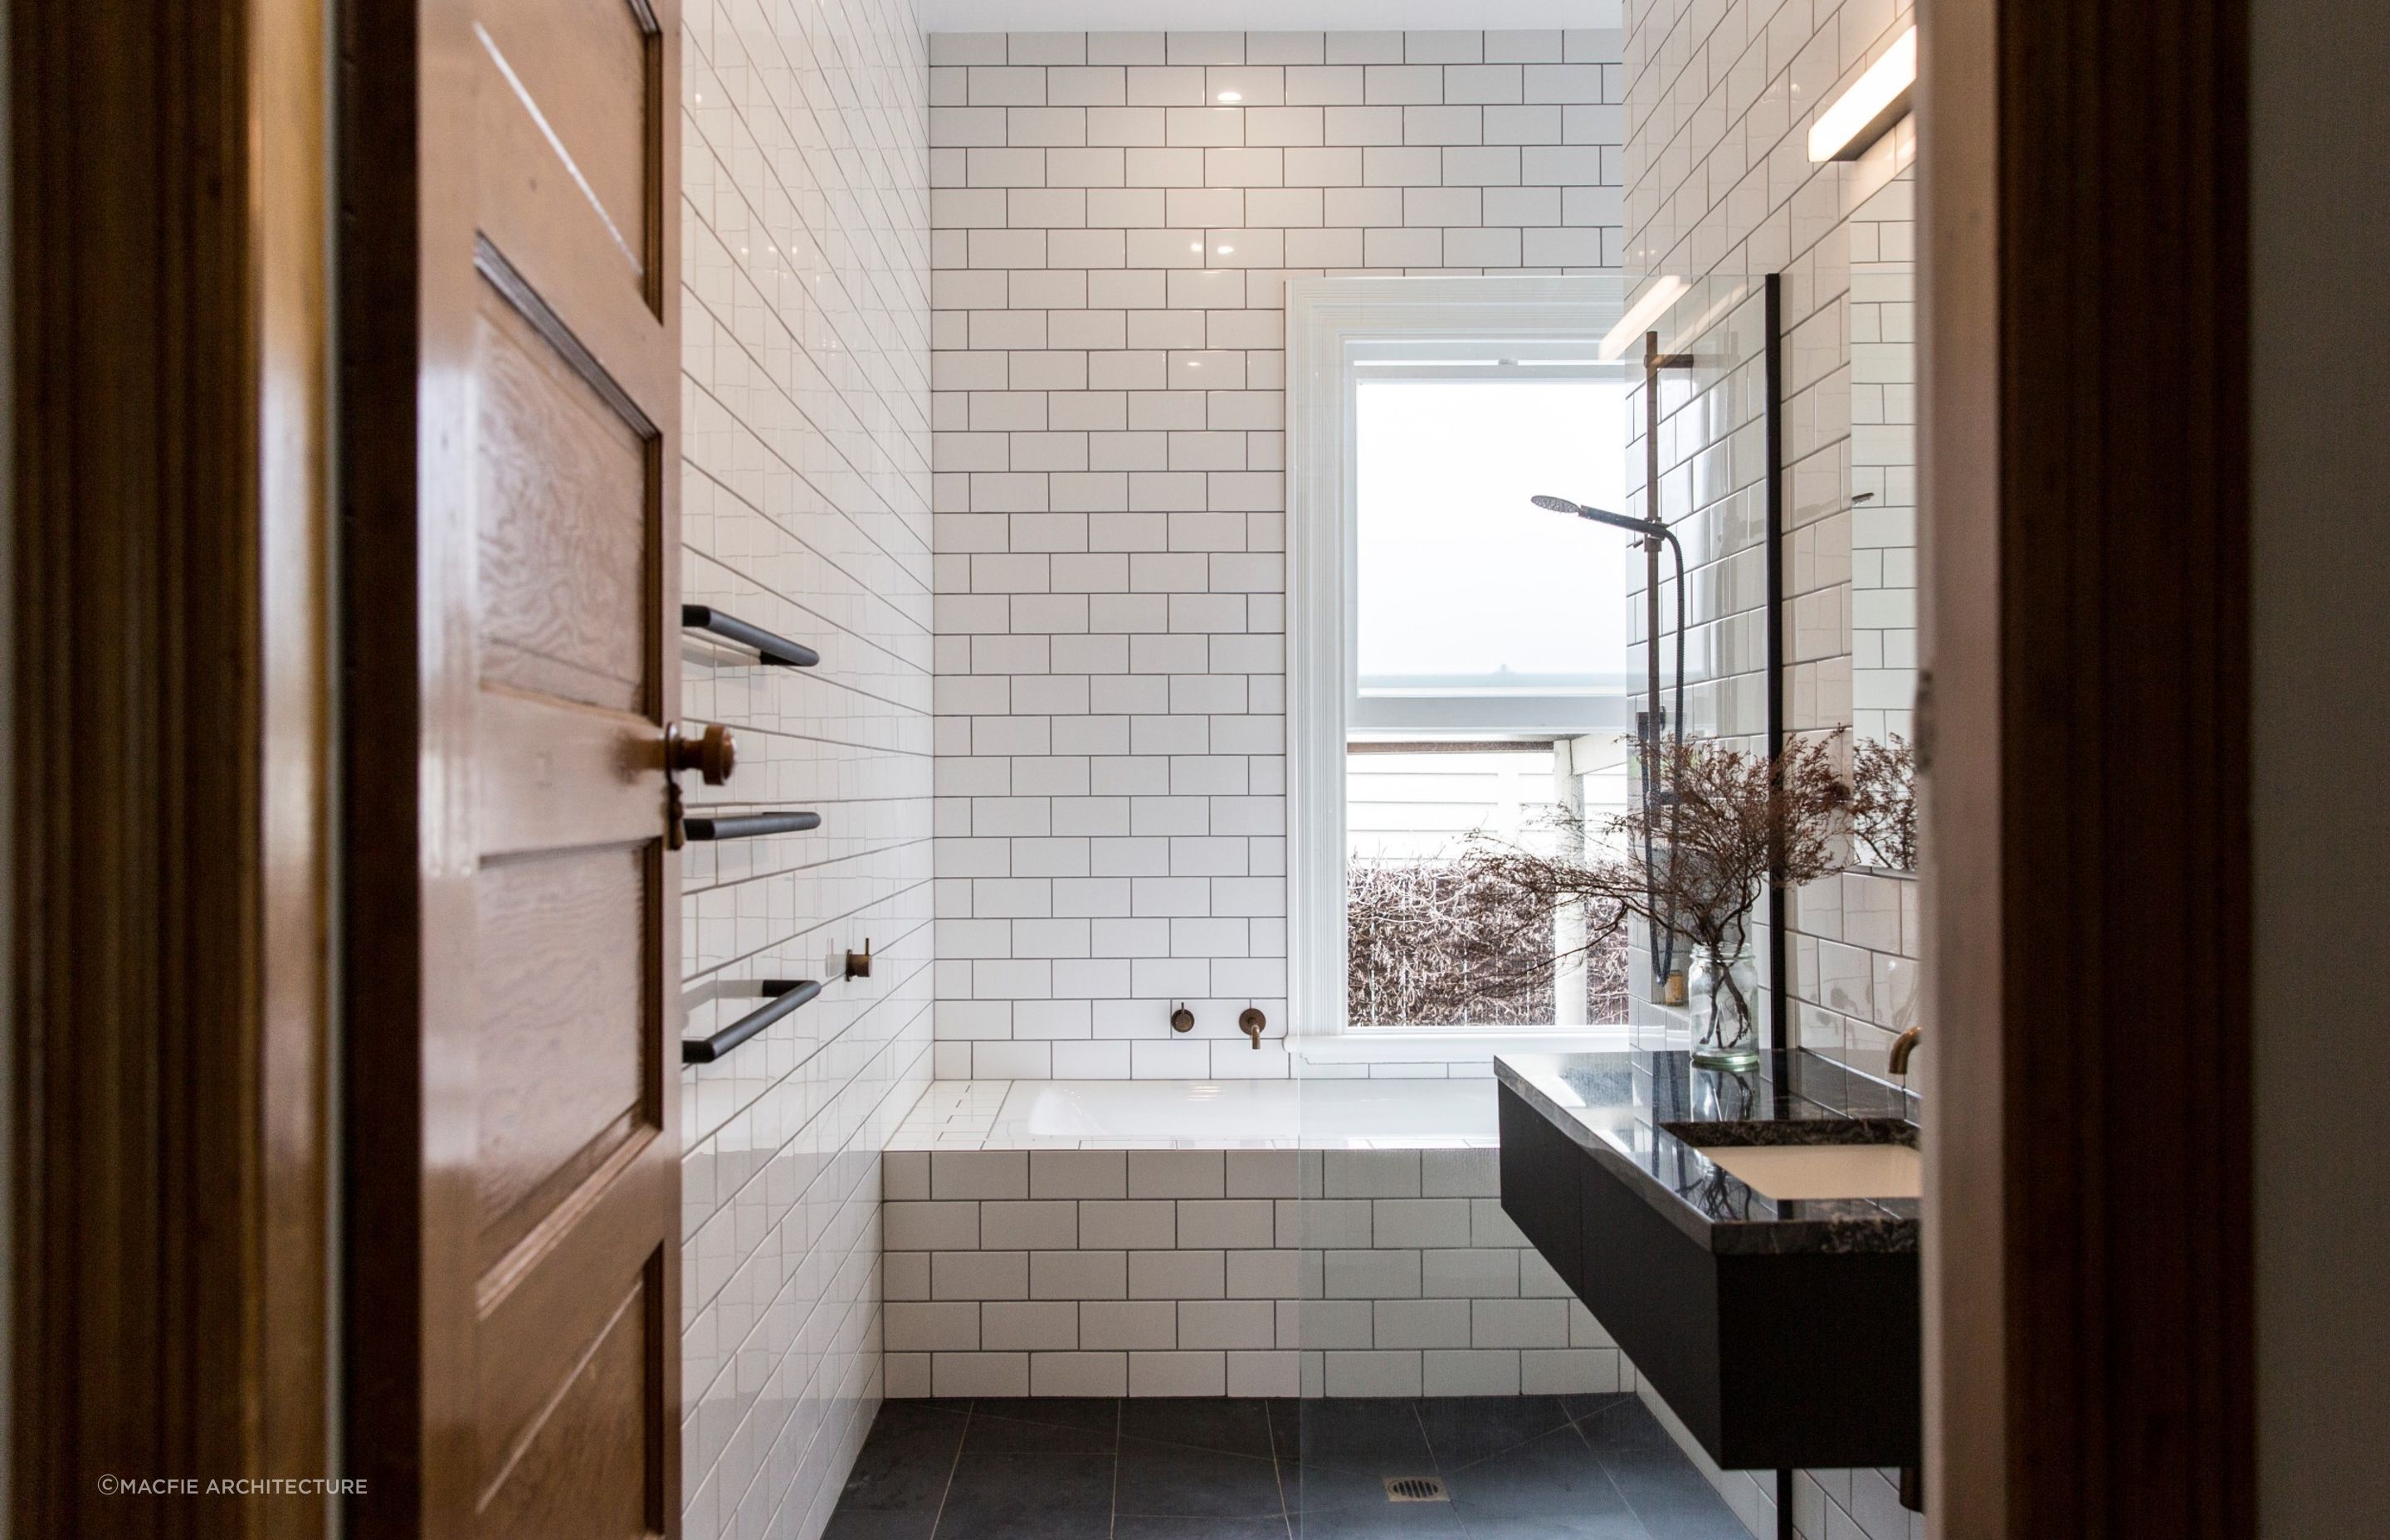 Beautiful tile details flowing seamlessly over the edge of the bath in this bathroom in Sandringham.